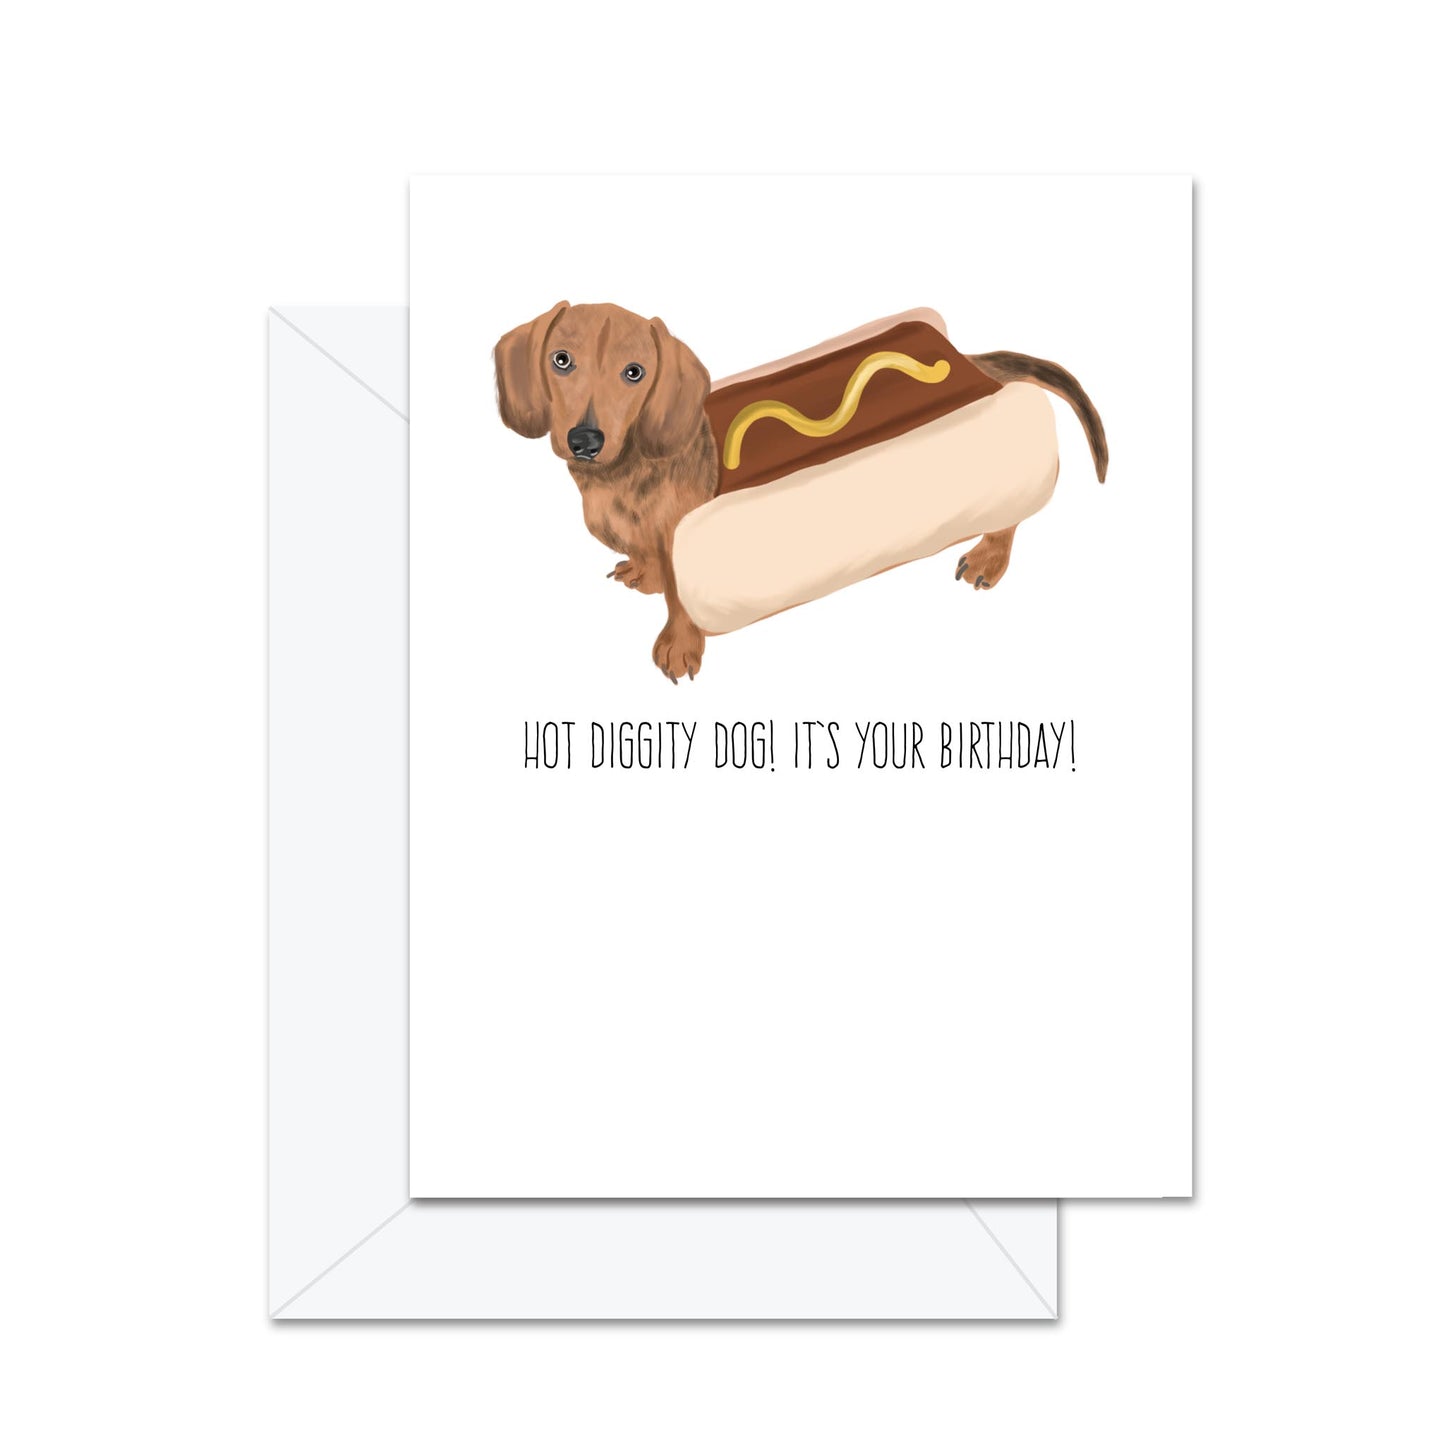 Hot Diggity Dog! It's Your Birthday! - Greeting Card